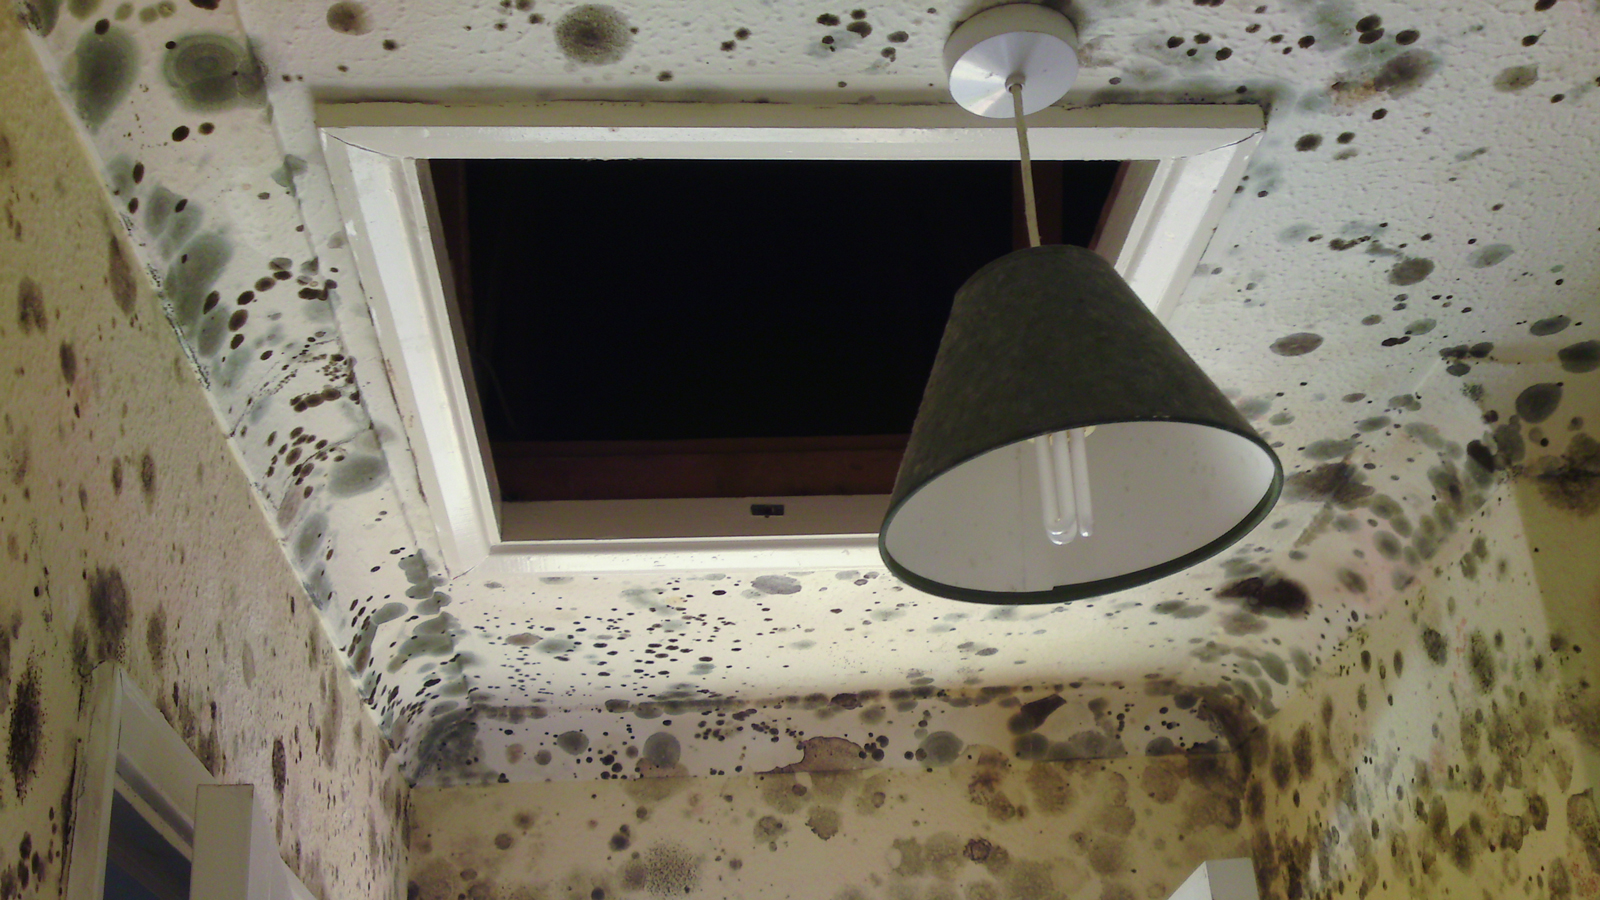 Condensation In The Home, Causes & How To Stop It